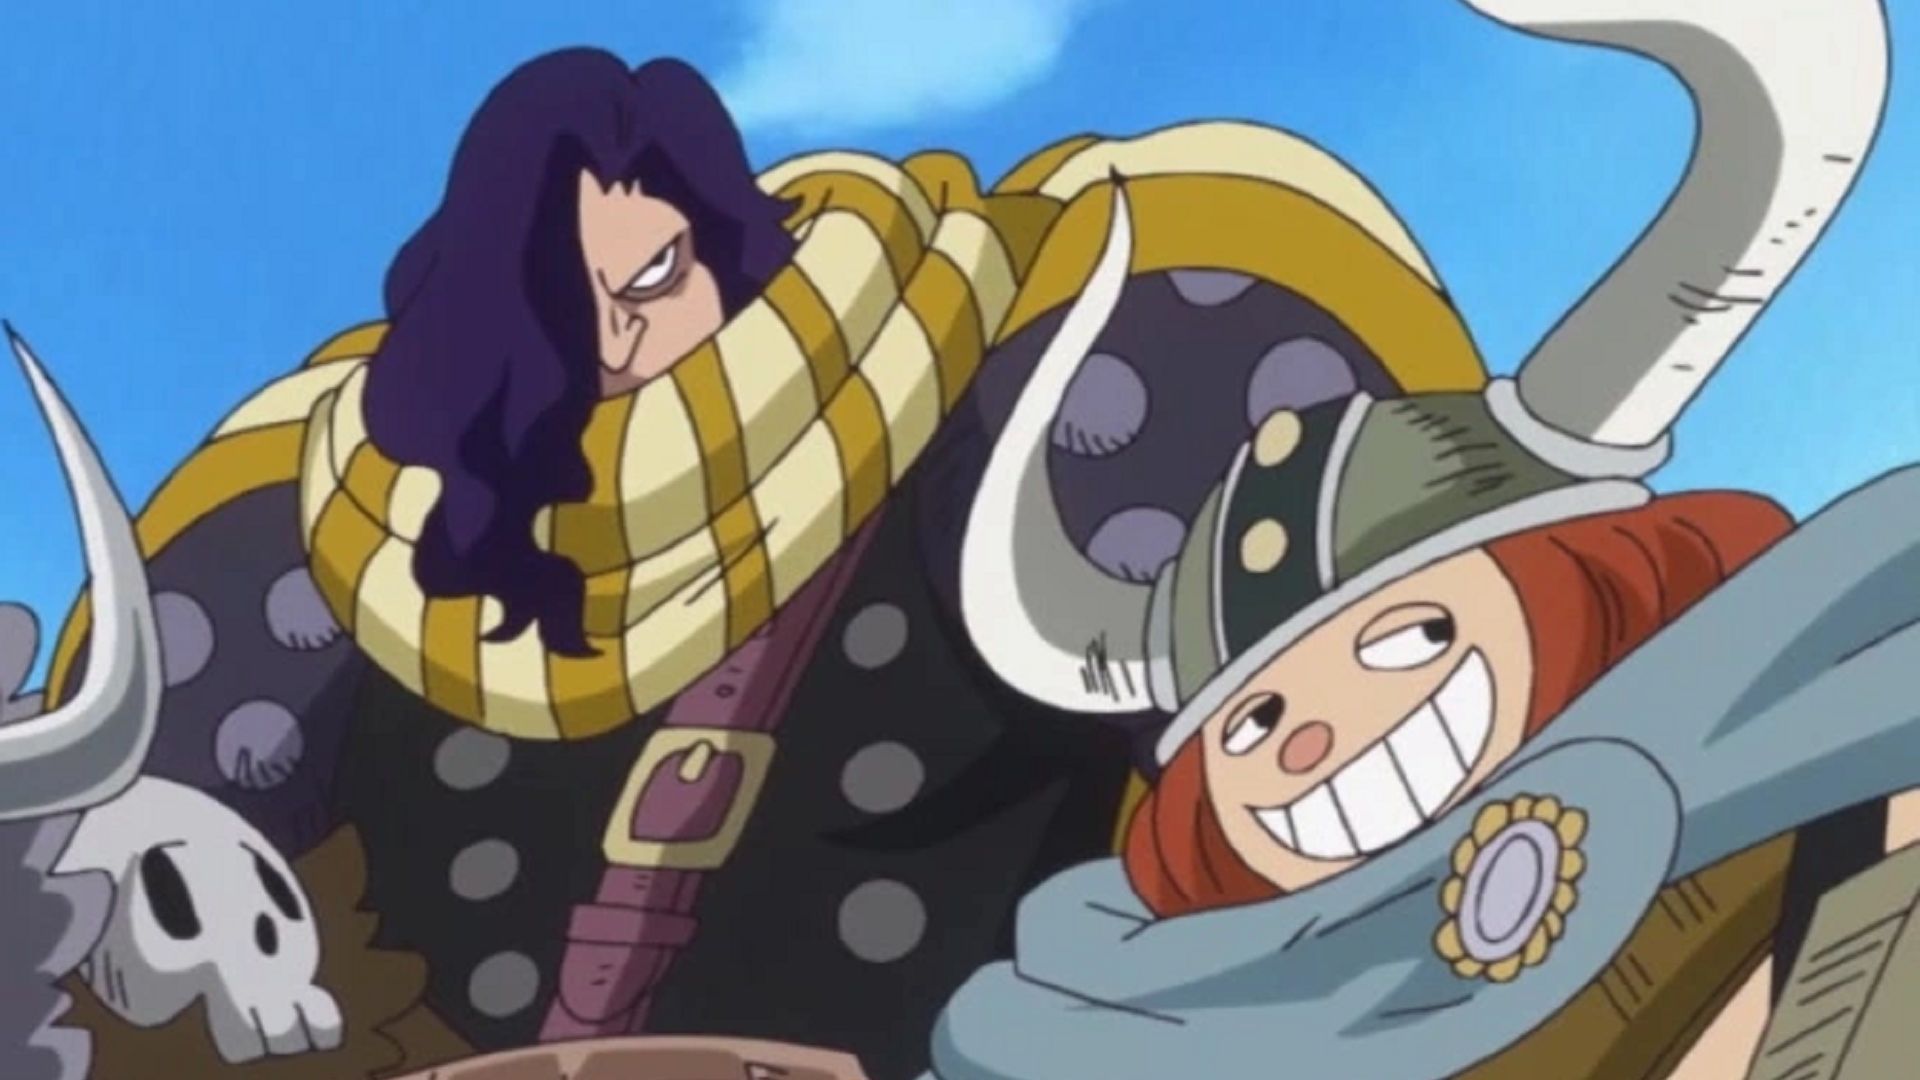 Road and Goldberg as seen in the One Piece anime (Image via Toei Animation)